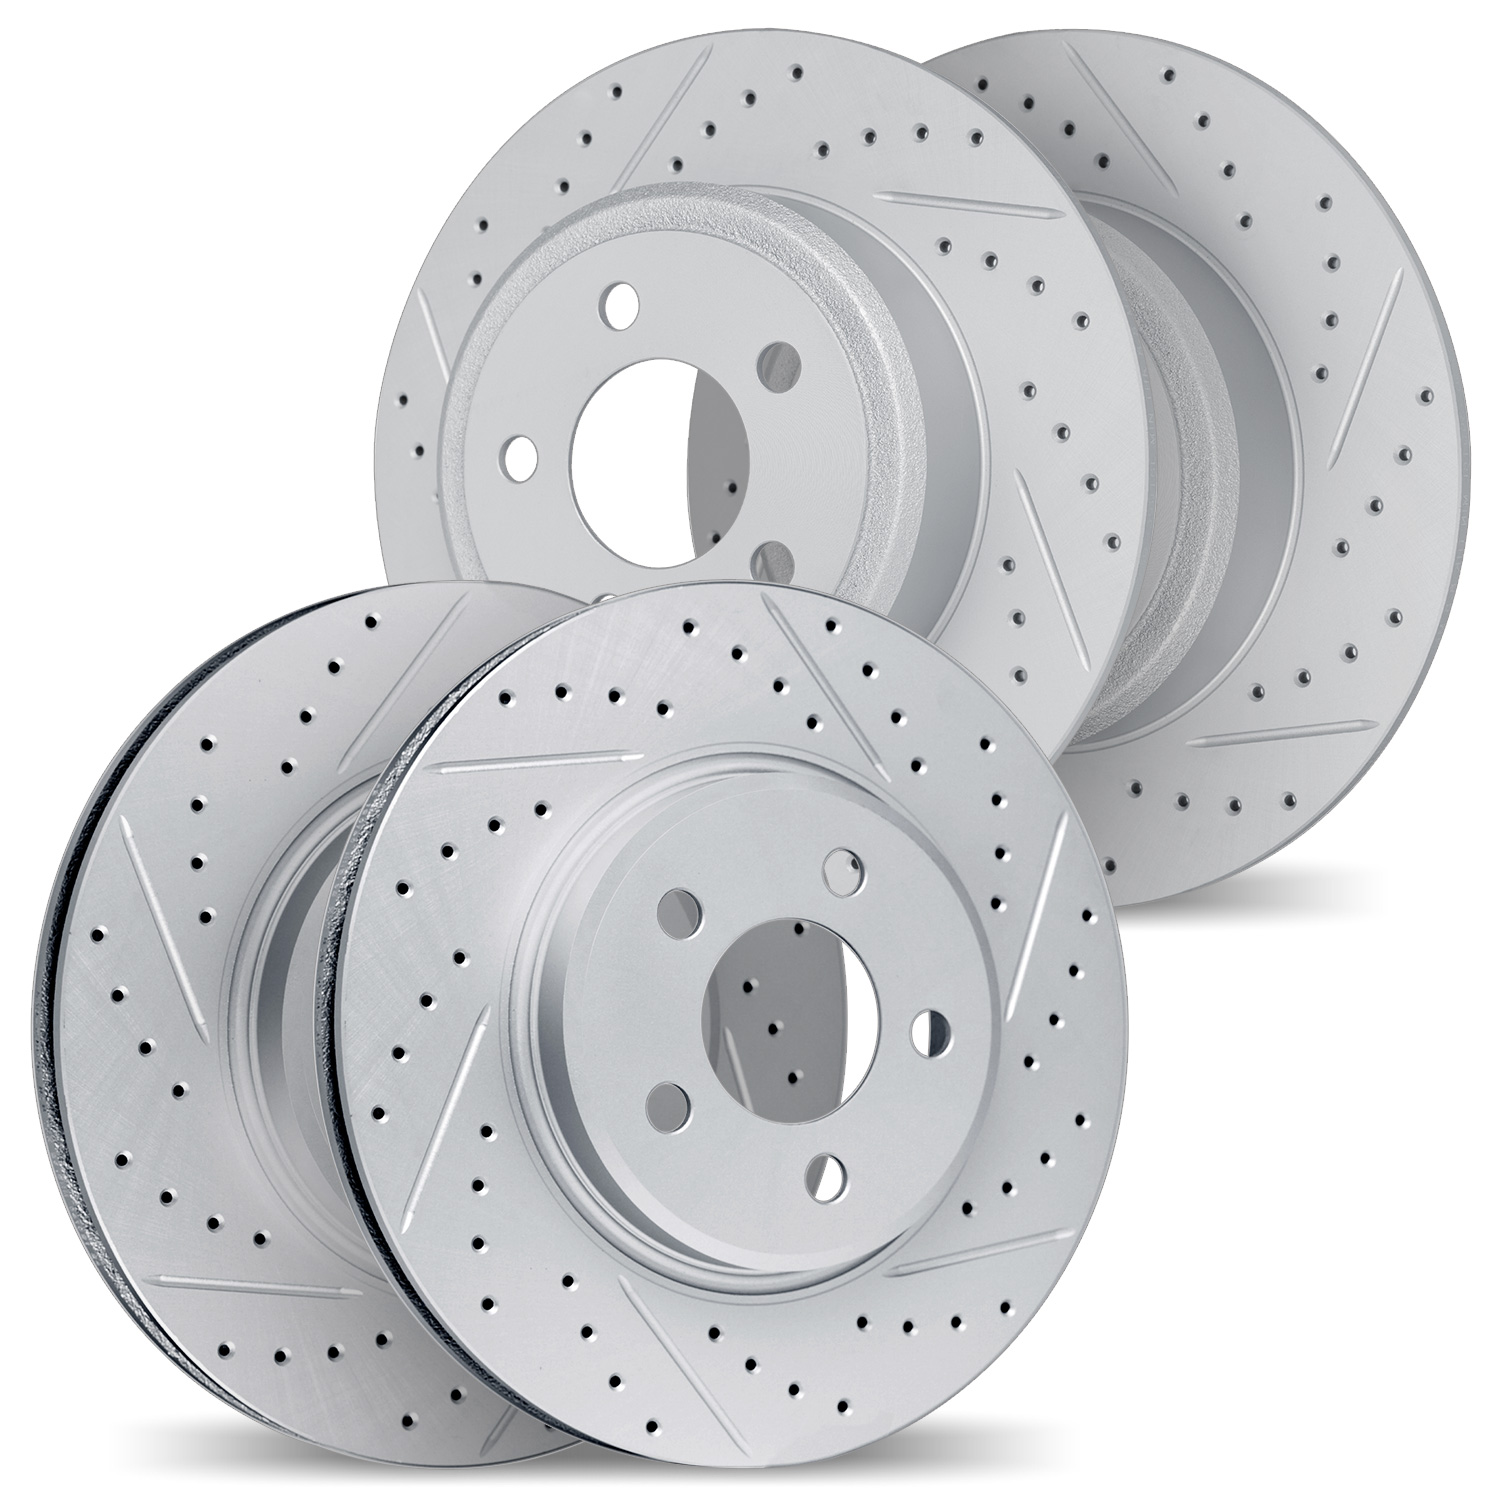 2004-31007 Geoperformance Drilled/Slotted Brake Rotors, 1991-1999 BMW, Position: Front and Rear